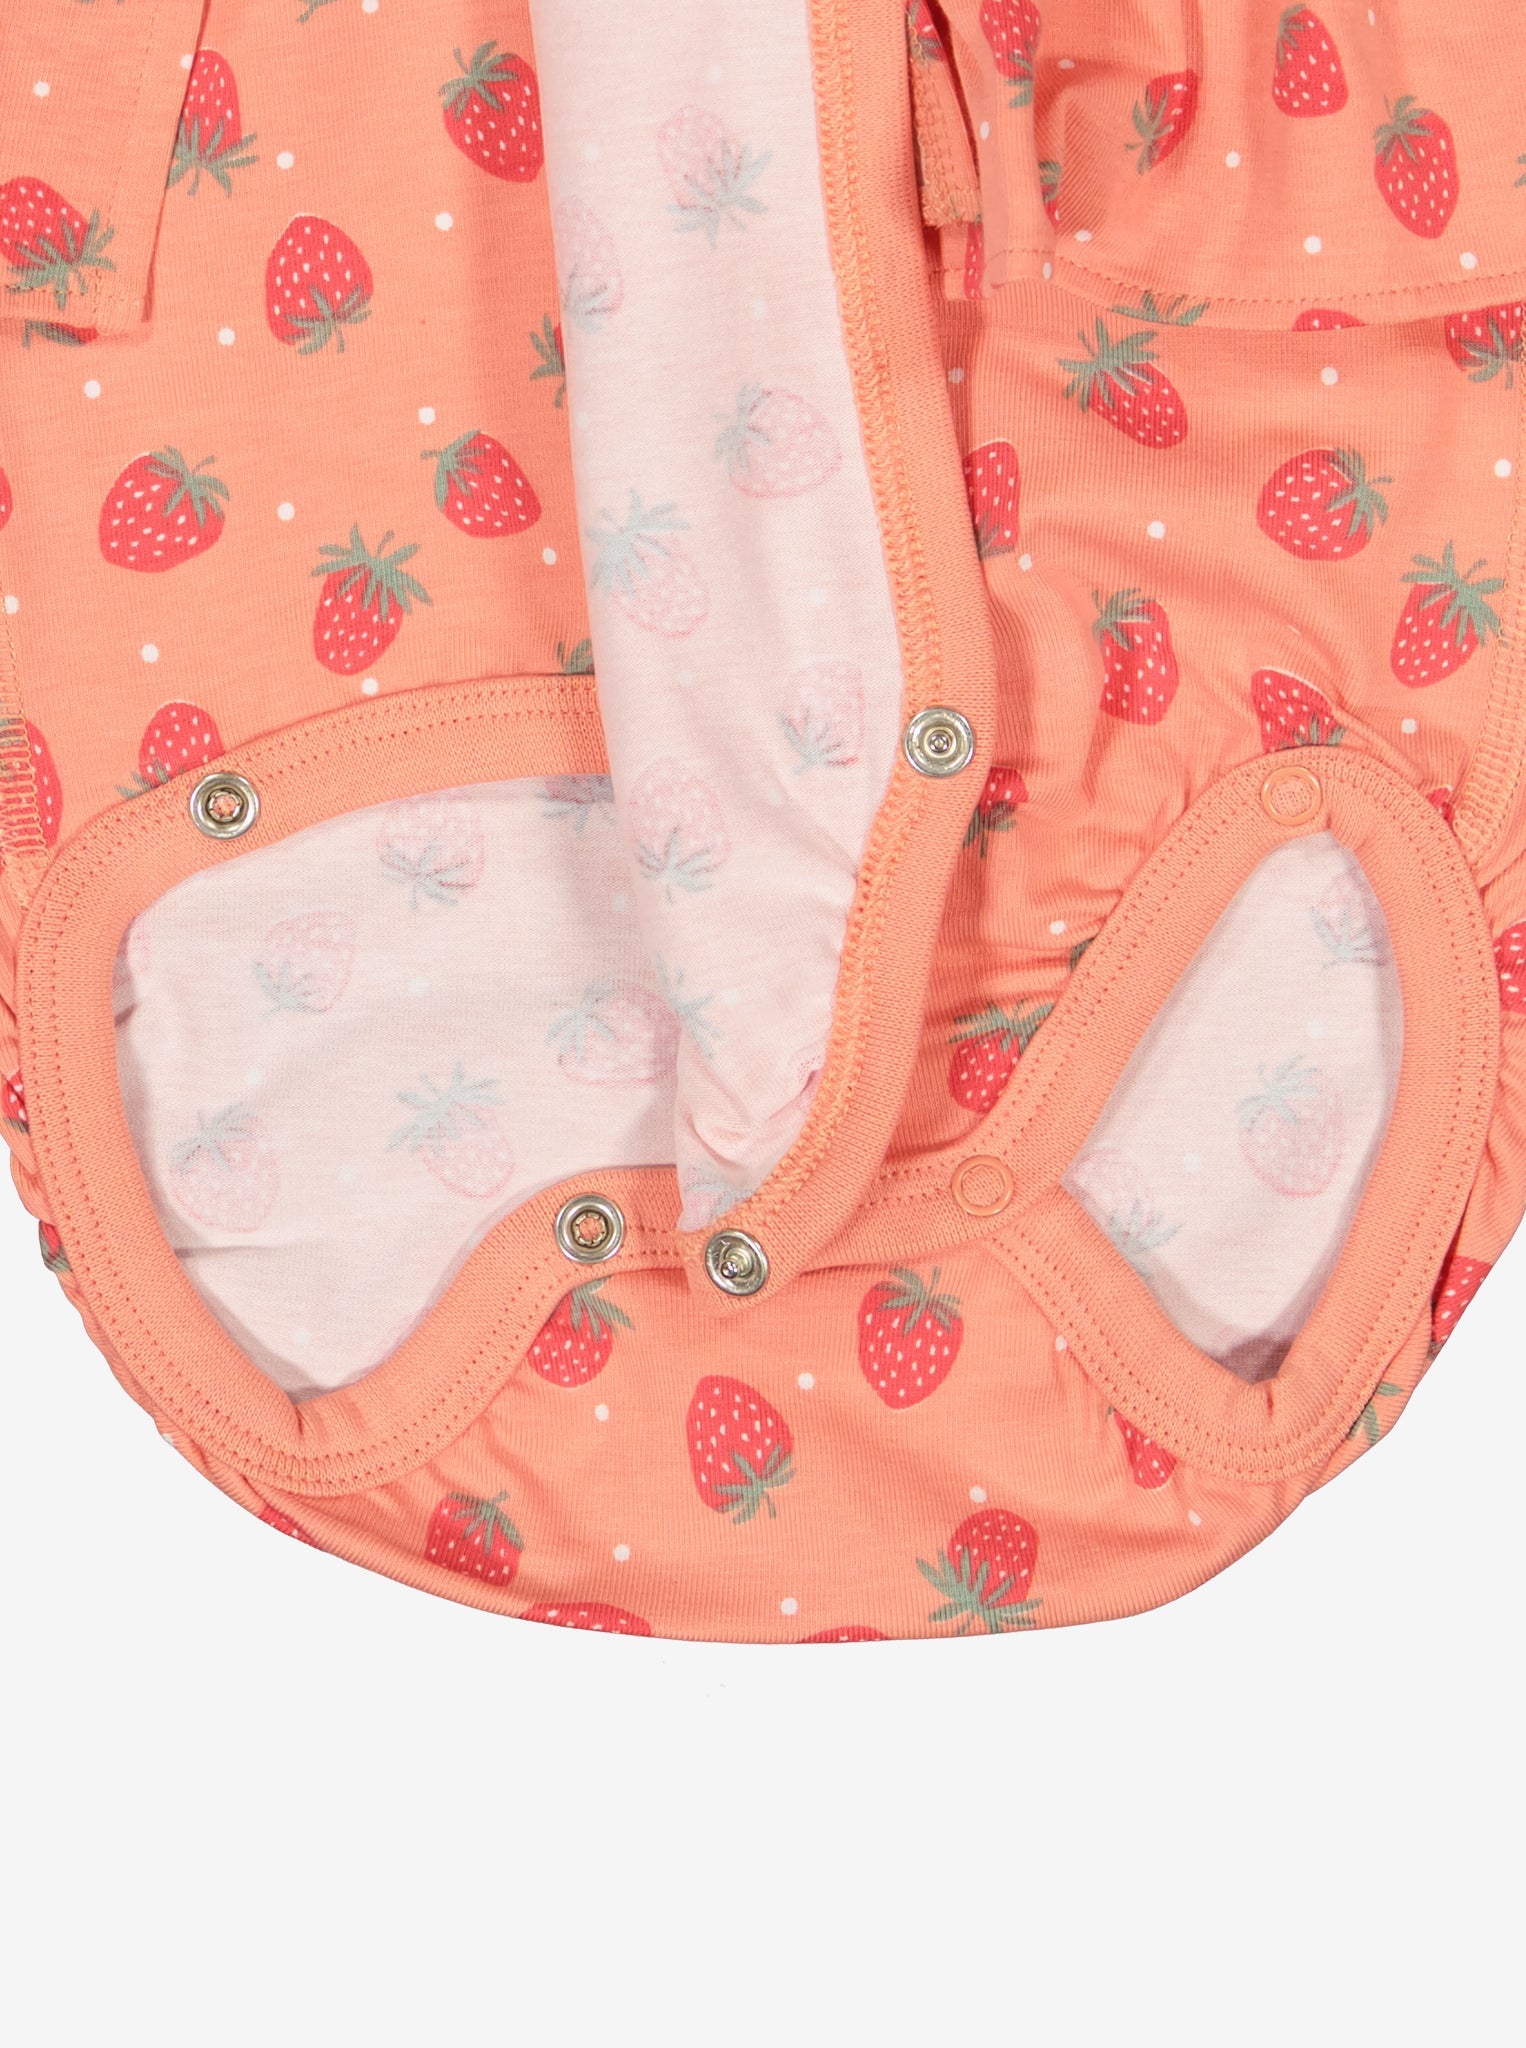 Strawberry Print Wraparound Babygrow from Polarn O. Pyret Kidswear. Made using sustainable sourced materials.